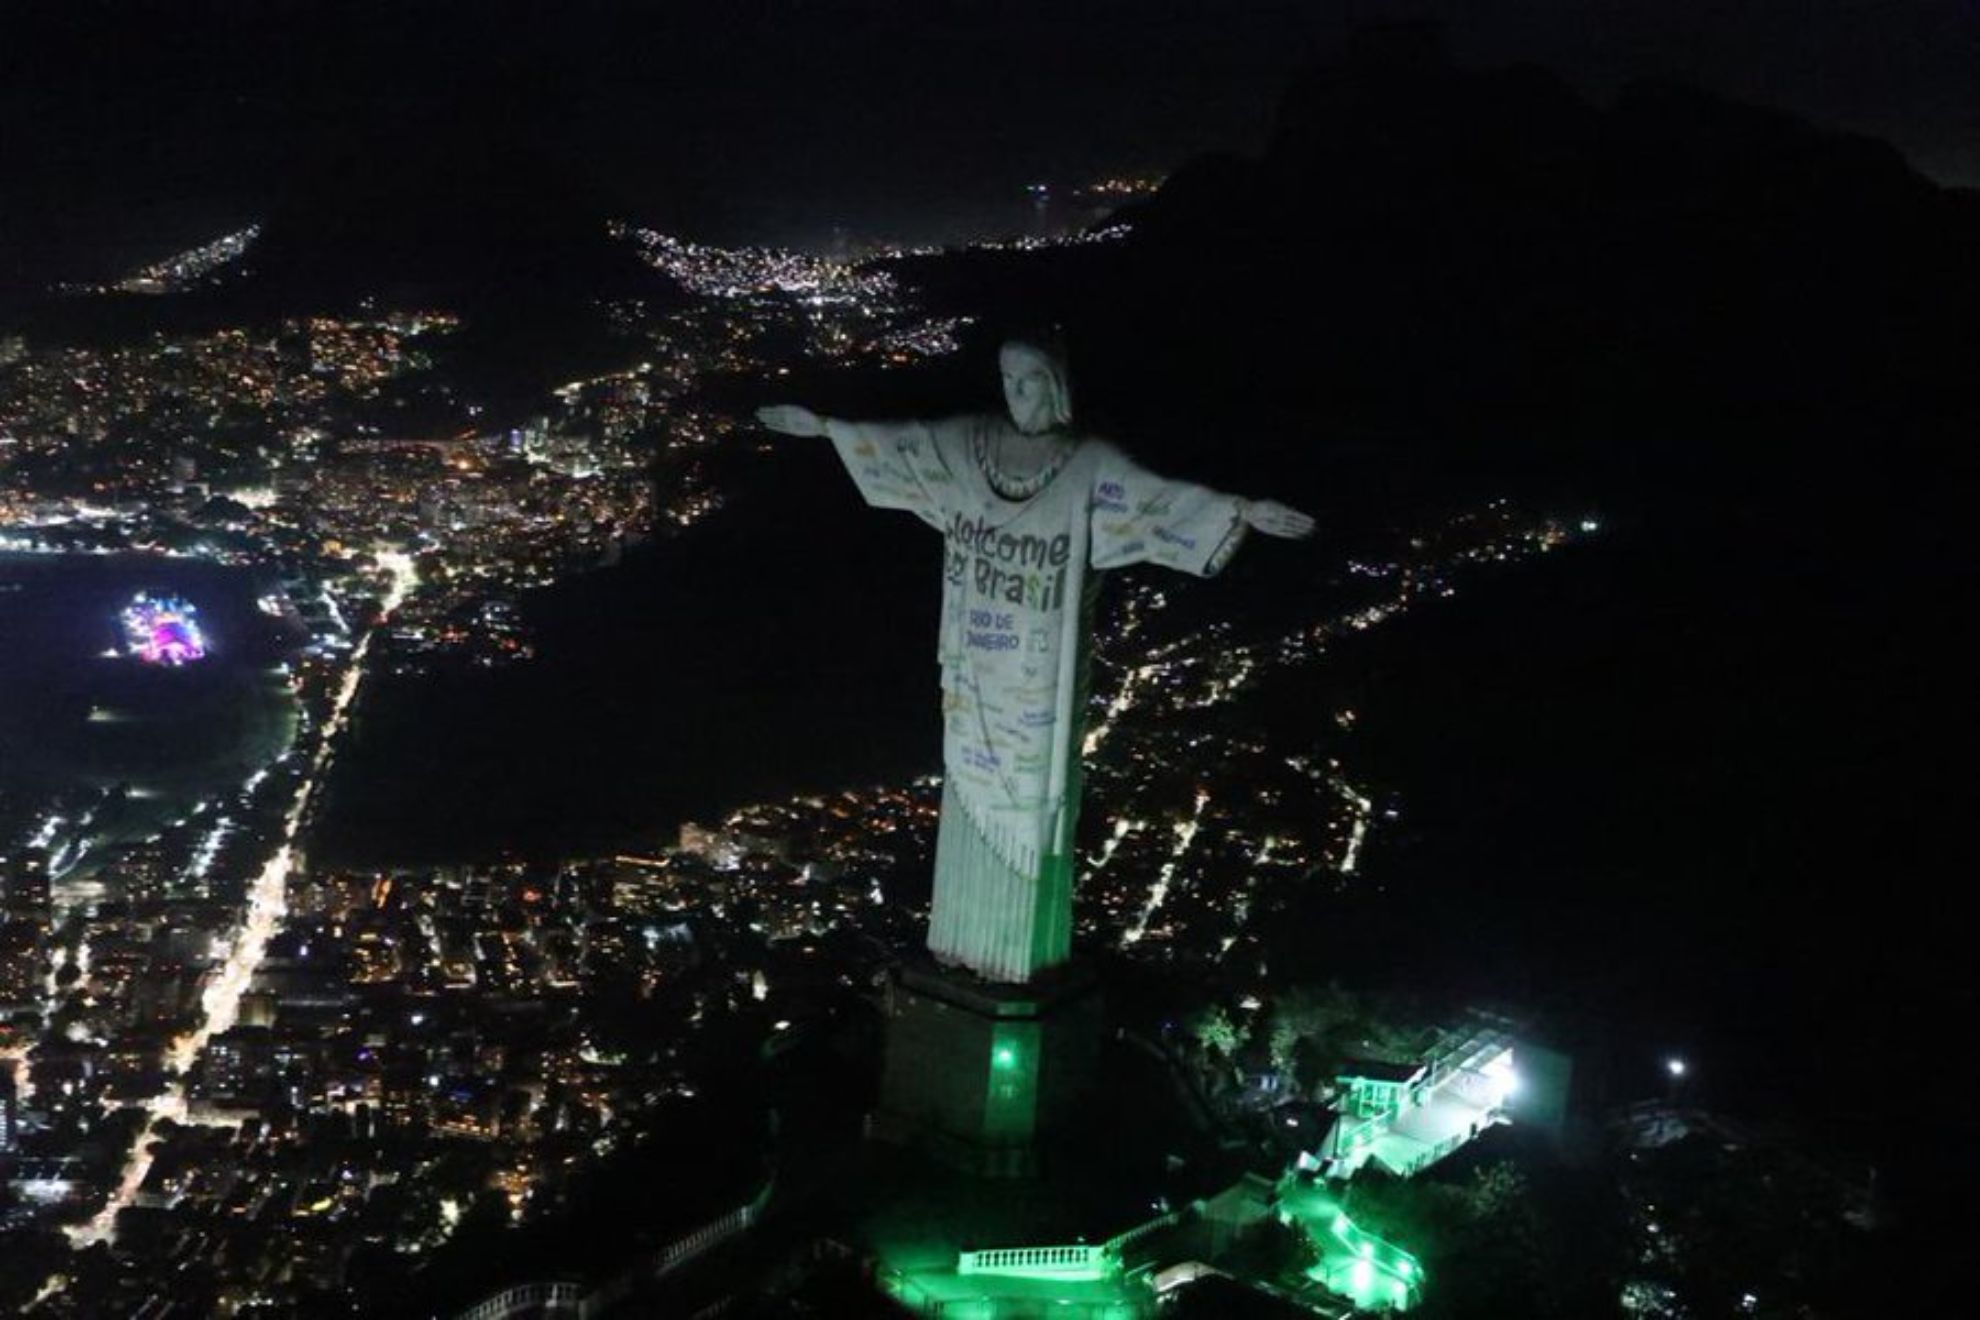 Brazil welcomes Taylor Swift with a 'swiftie' projection on Christ the Redeemer